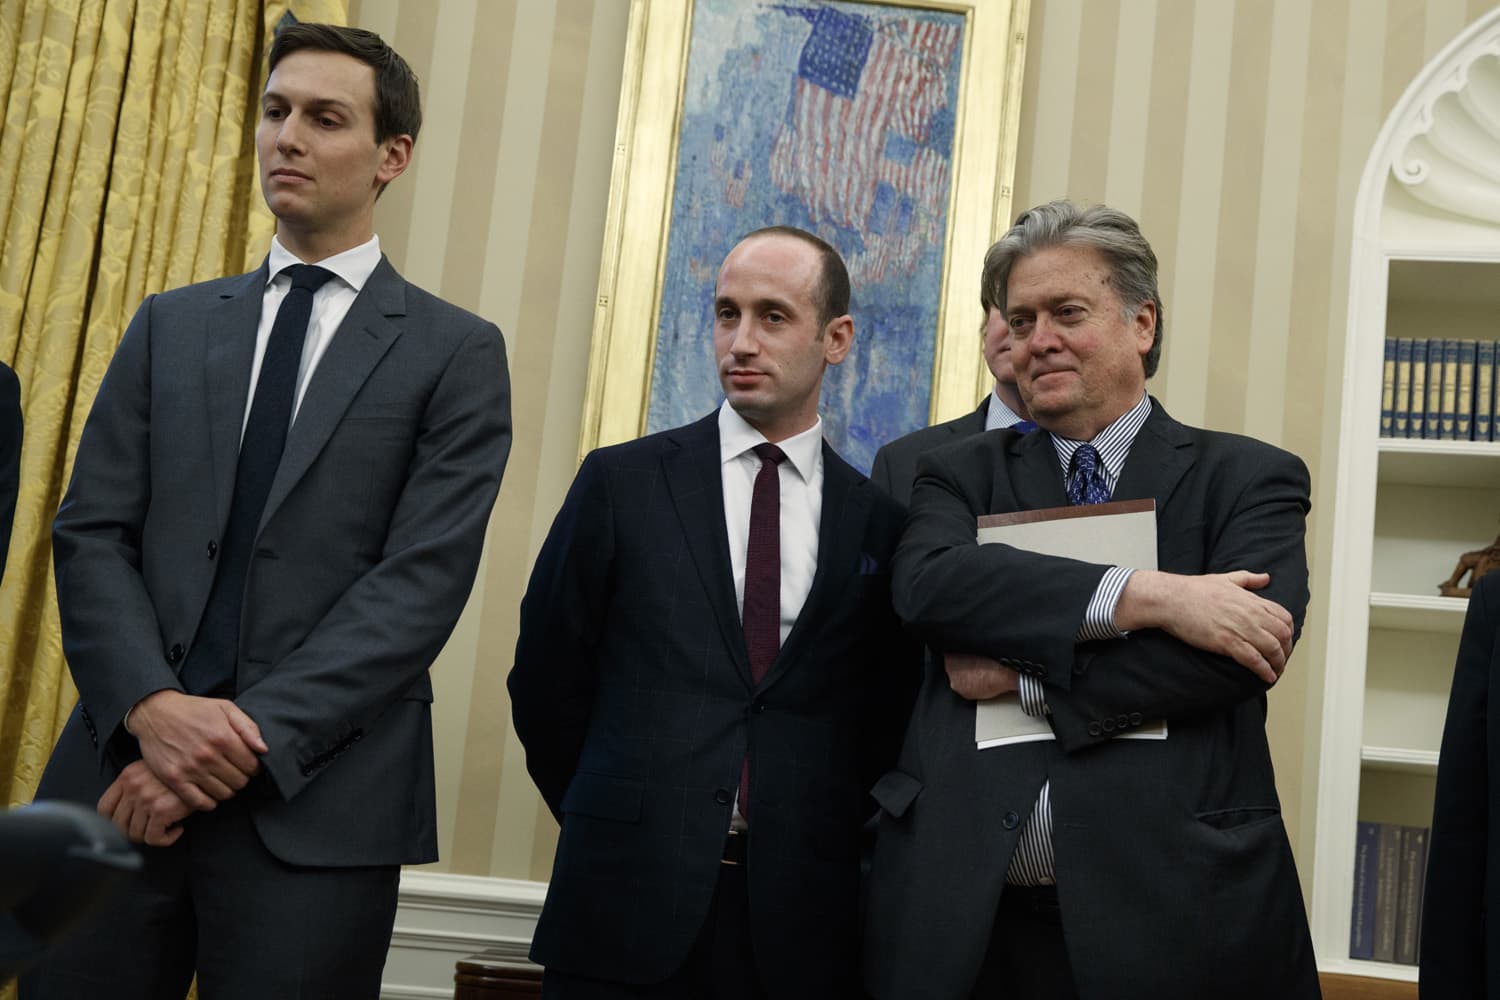 From left, Senior Adviser Jared Kushner, policy adviser Stephen Miller, and chief strategist Steve Bannon watches as President Donald Trump signs an executive order to withdraw the U.S. from the 12-nation Trans-Pacific Partnership trade pact agreed to under the Obama administration, Monday, Jan. 23, 2017, in the Oval Office of the White House in Washington. (Evan Vucci/AP)